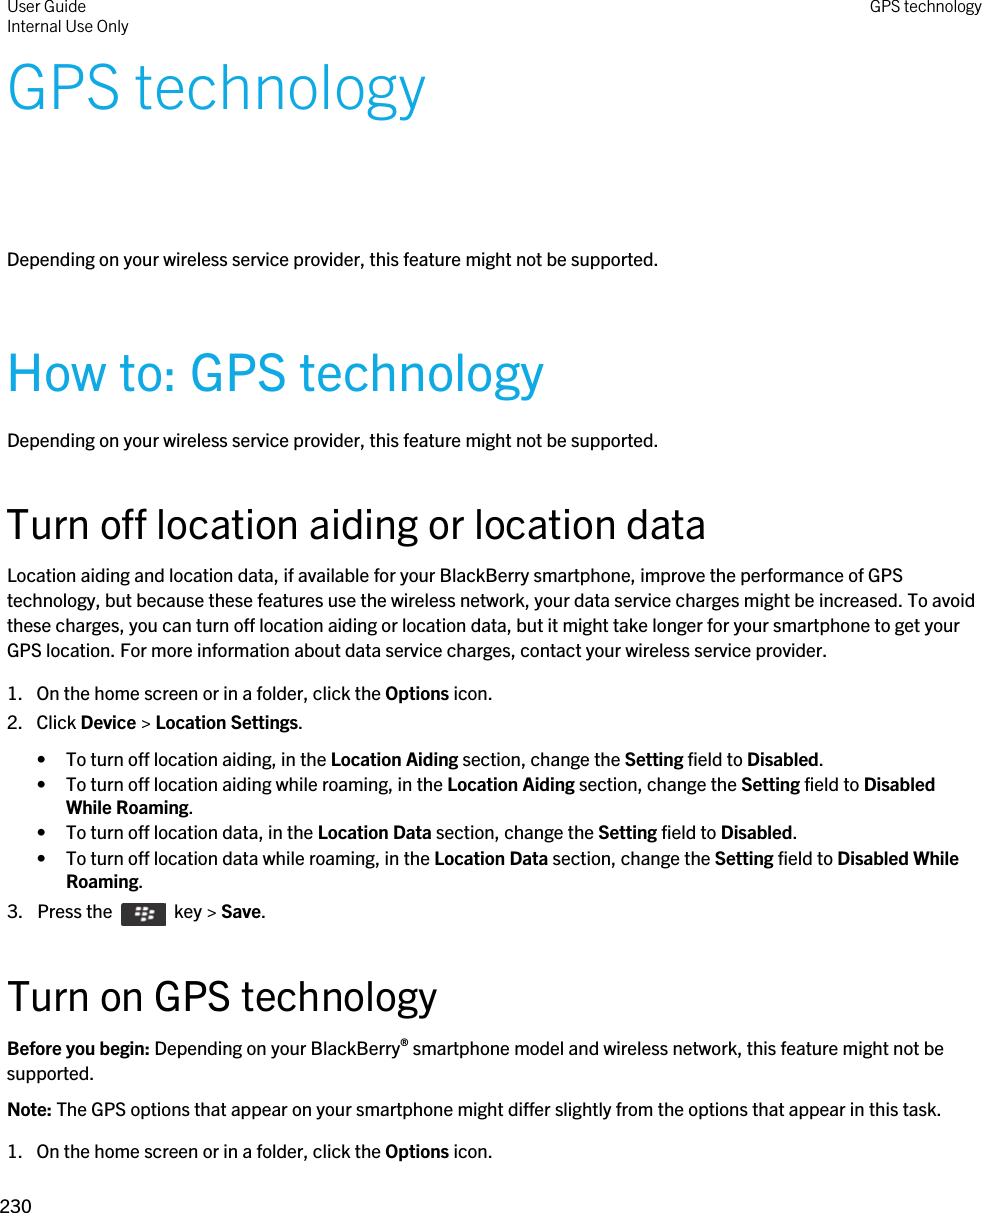 GPS technologyDepending on your wireless service provider, this feature might not be supported. How to: GPS technologyDepending on your wireless service provider, this feature might not be supported. Turn off location aiding or location dataLocation aiding and location data, if available for your BlackBerry smartphone, improve the performance of GPS technology, but because these features use the wireless network, your data service charges might be increased. To avoid these charges, you can turn off location aiding or location data, but it might take longer for your smartphone to get your GPS location. For more information about data service charges, contact your wireless service provider.1. On the home screen or in a folder, click the Options icon.2. Click Device &gt; Location Settings.• To turn off location aiding, in the Location Aiding section, change the Setting field to Disabled.• To turn off location aiding while roaming, in the Location Aiding section, change the Setting field to Disabled While Roaming.• To turn off location data, in the Location Data section, change the Setting field to Disabled.• To turn off location data while roaming, in the Location Data section, change the Setting field to Disabled While Roaming.3.  Press the    key &gt; Save. Turn on GPS technologyBefore you begin: Depending on your BlackBerry® smartphone model and wireless network, this feature might not be supported. Note: The GPS options that appear on your smartphone might differ slightly from the options that appear in this task.1. On the home screen or in a folder, click the Options icon.User GuideInternal Use Only GPS technology230 